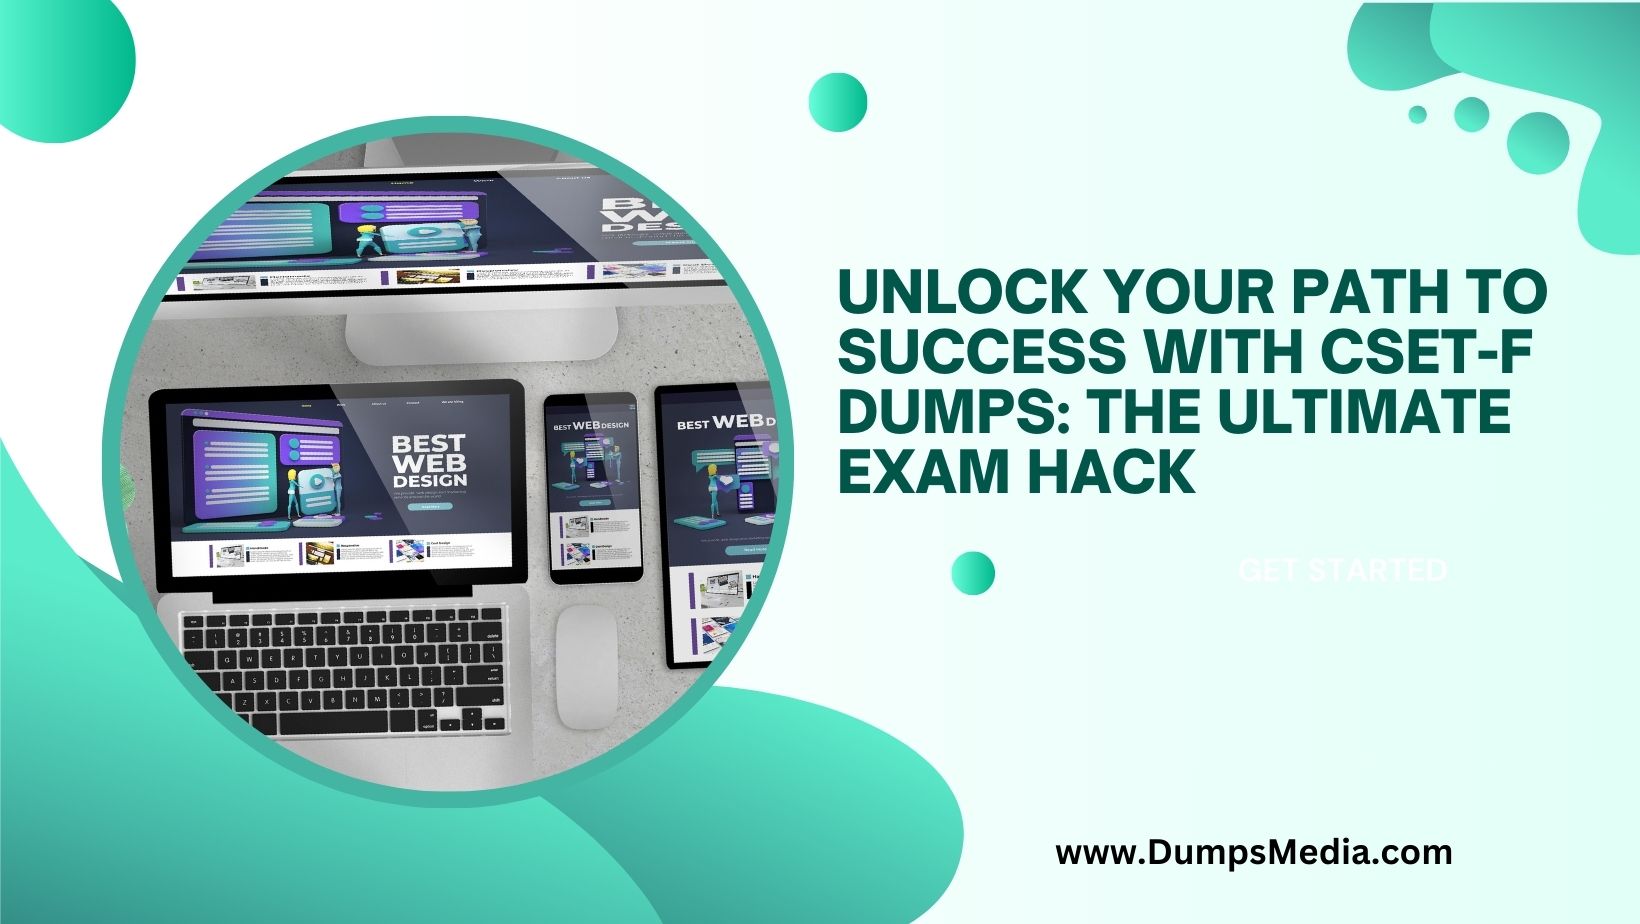 Unlock Your Path to Success with CSeT-F Dumps: The Ultimate Exam Hack